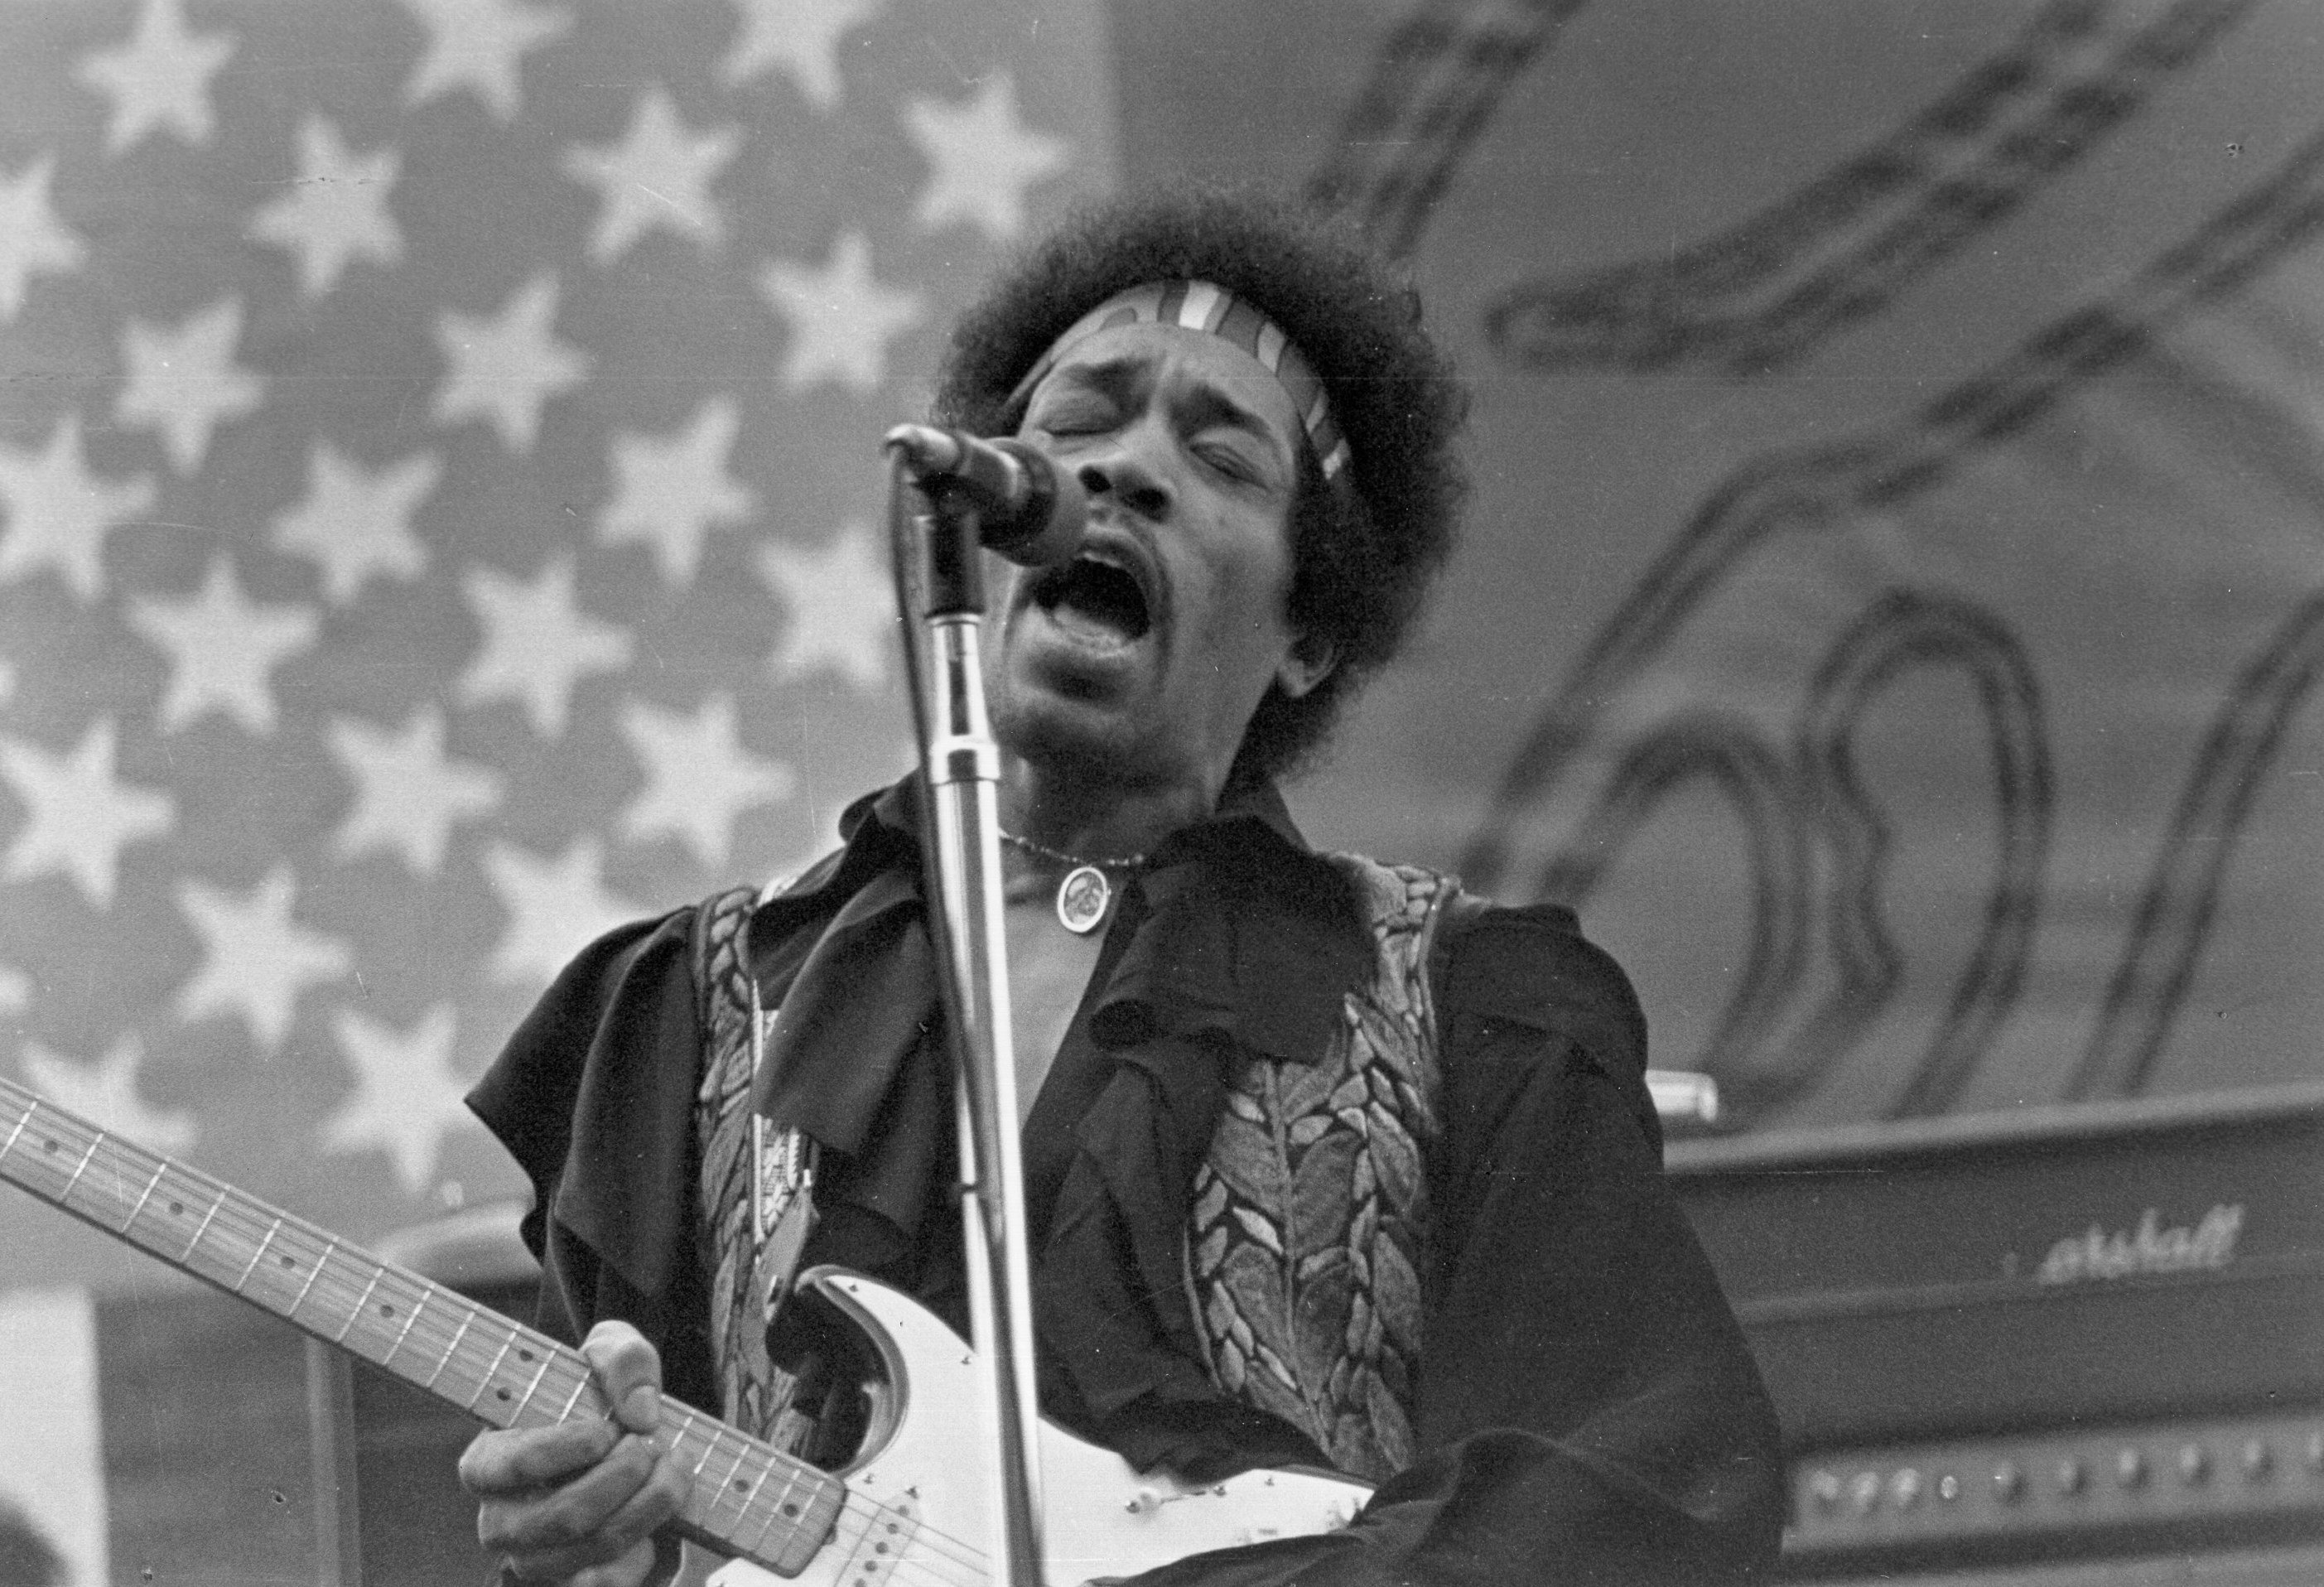 Jimi Hendrix, who formed a band called The Kasuals while in the army, performing in front of an American flag